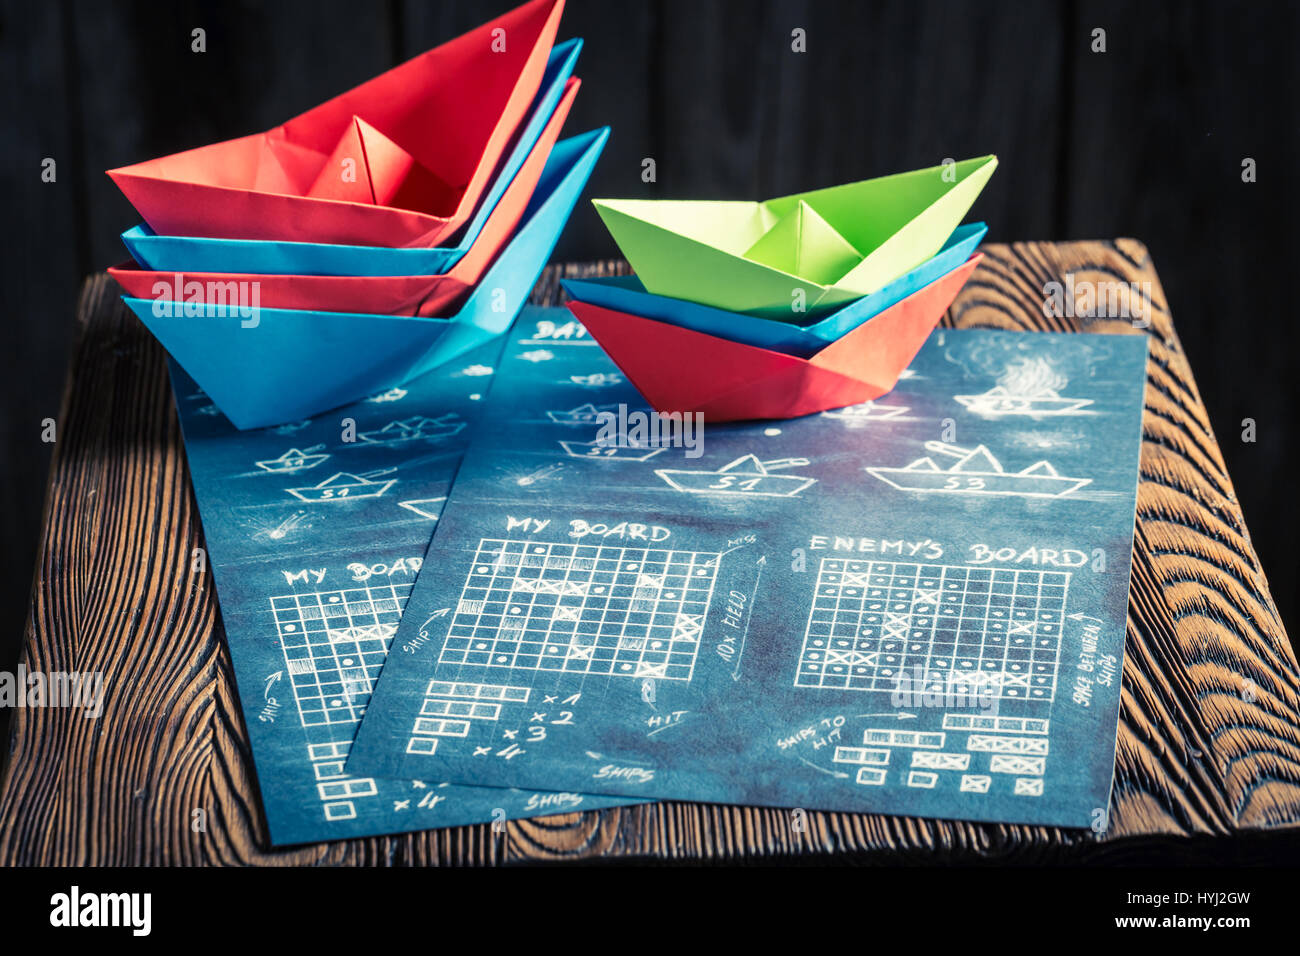 Children's battleship paper game with red and blue ships Stock Photo